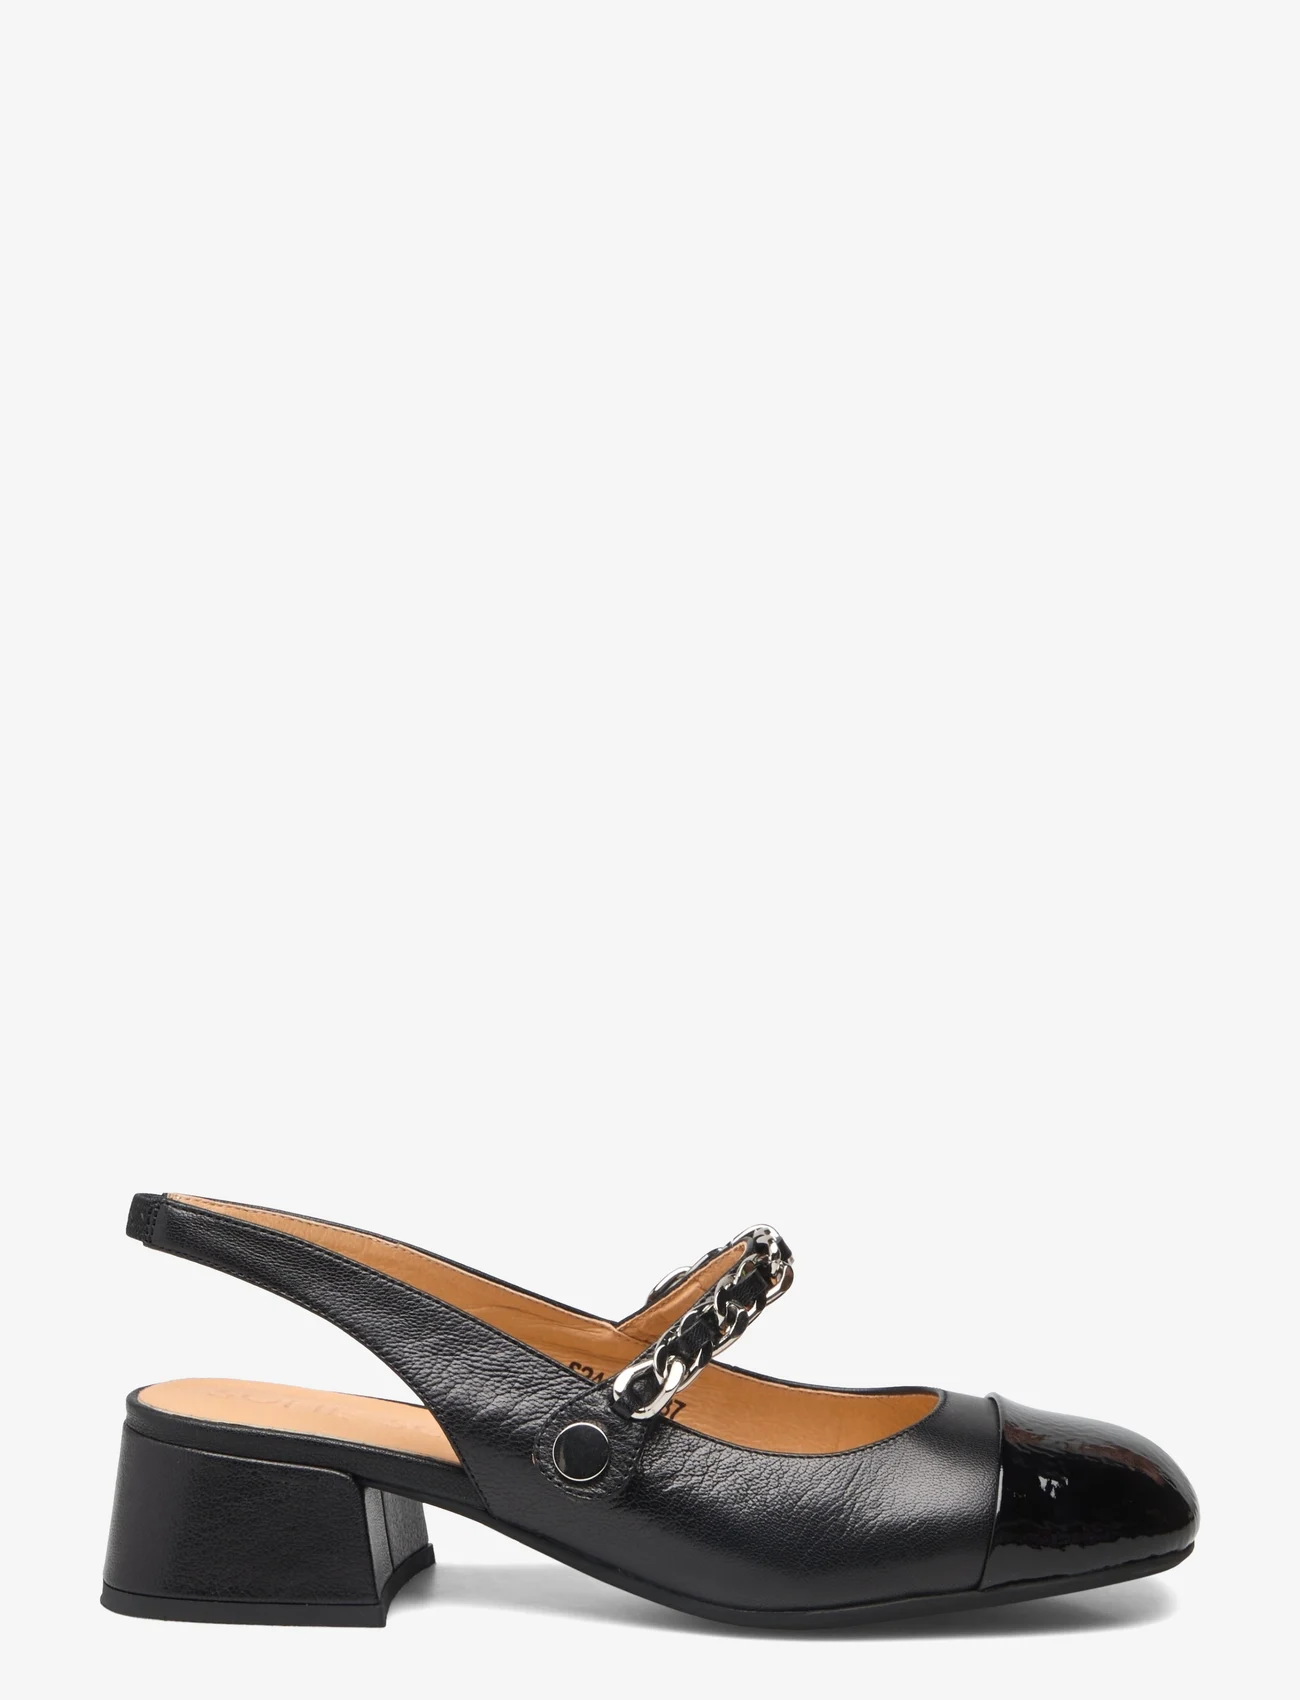 Sofie Schnoor - Shoe - party wear at outlet prices - black - 1